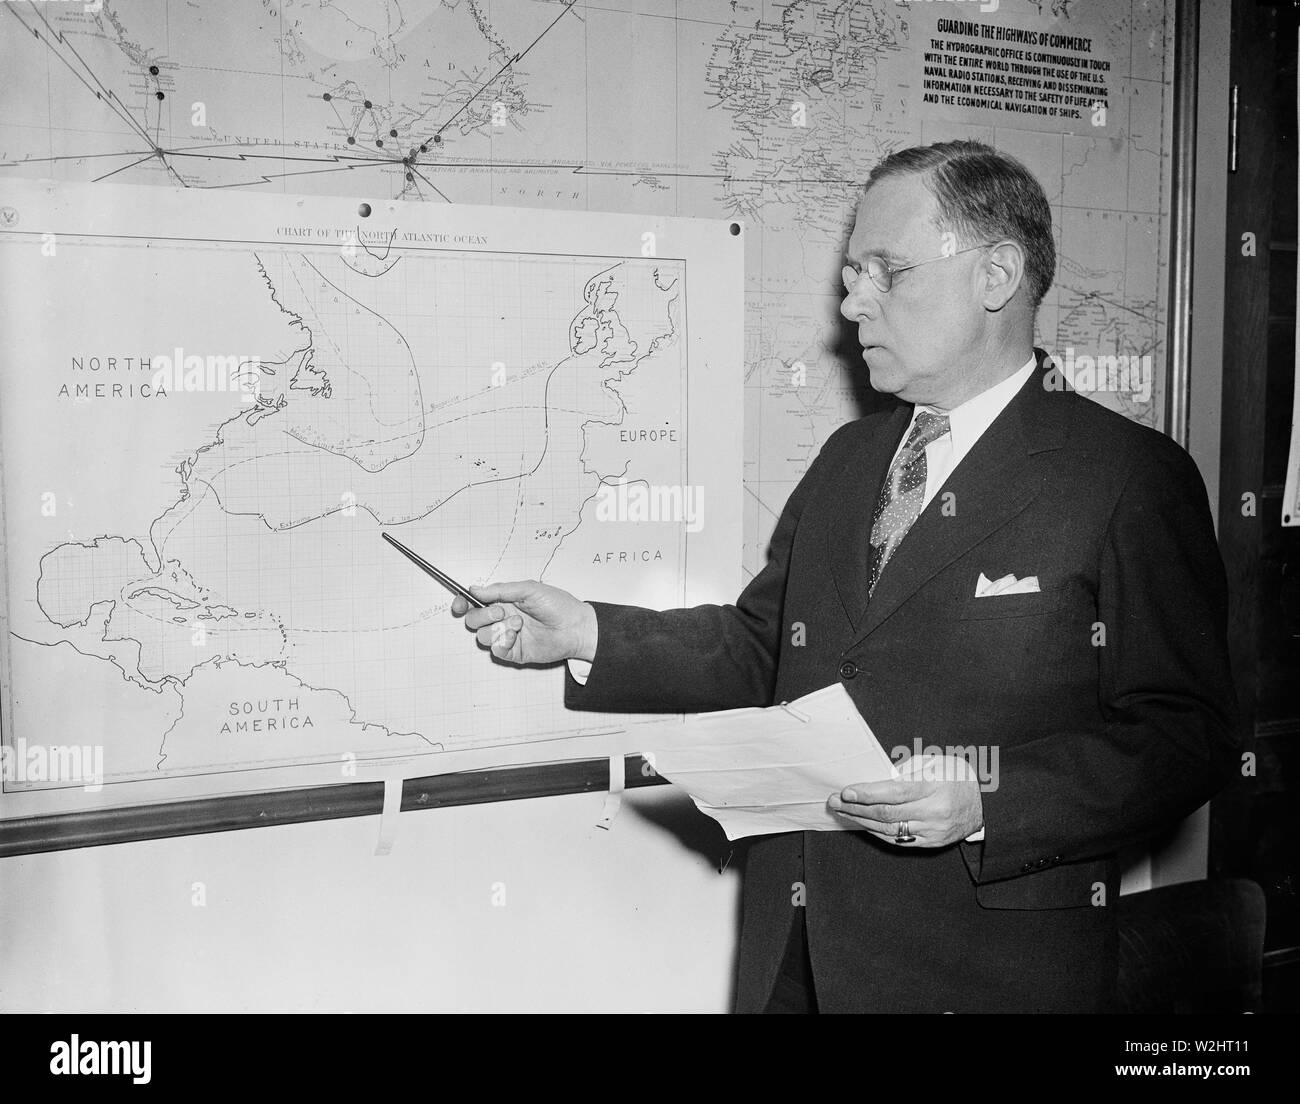 Man with chart showing North Atlantic Ocean ca. 1936 Stock Photo